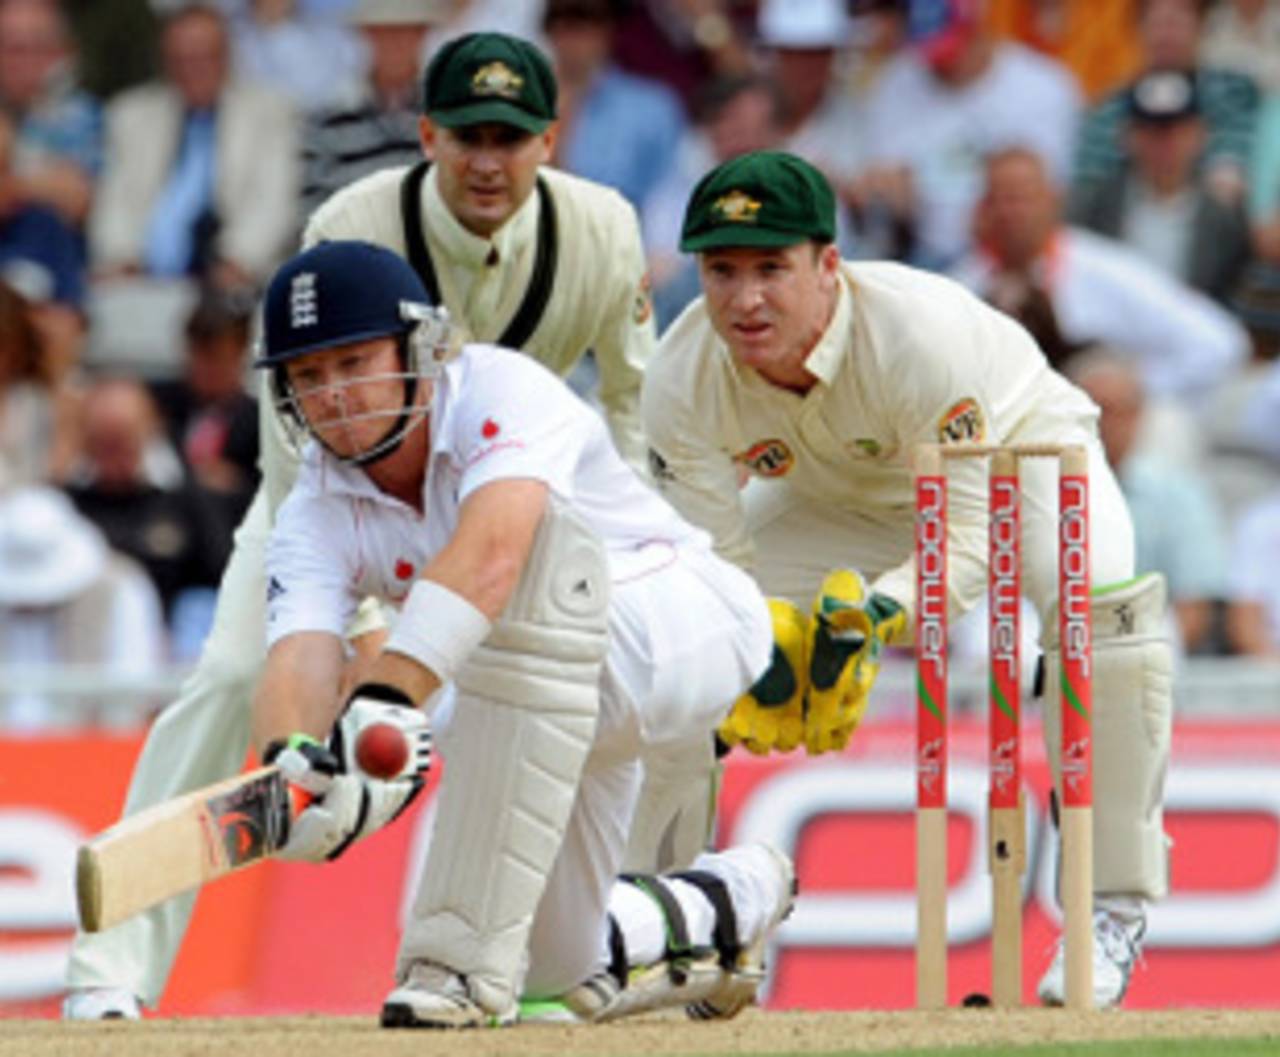 Ian Bell sweeps as Brad Haddin and Michael Clarke look on, England v Australia, 5th Test, The Oval, 1st day, August 20, 2009